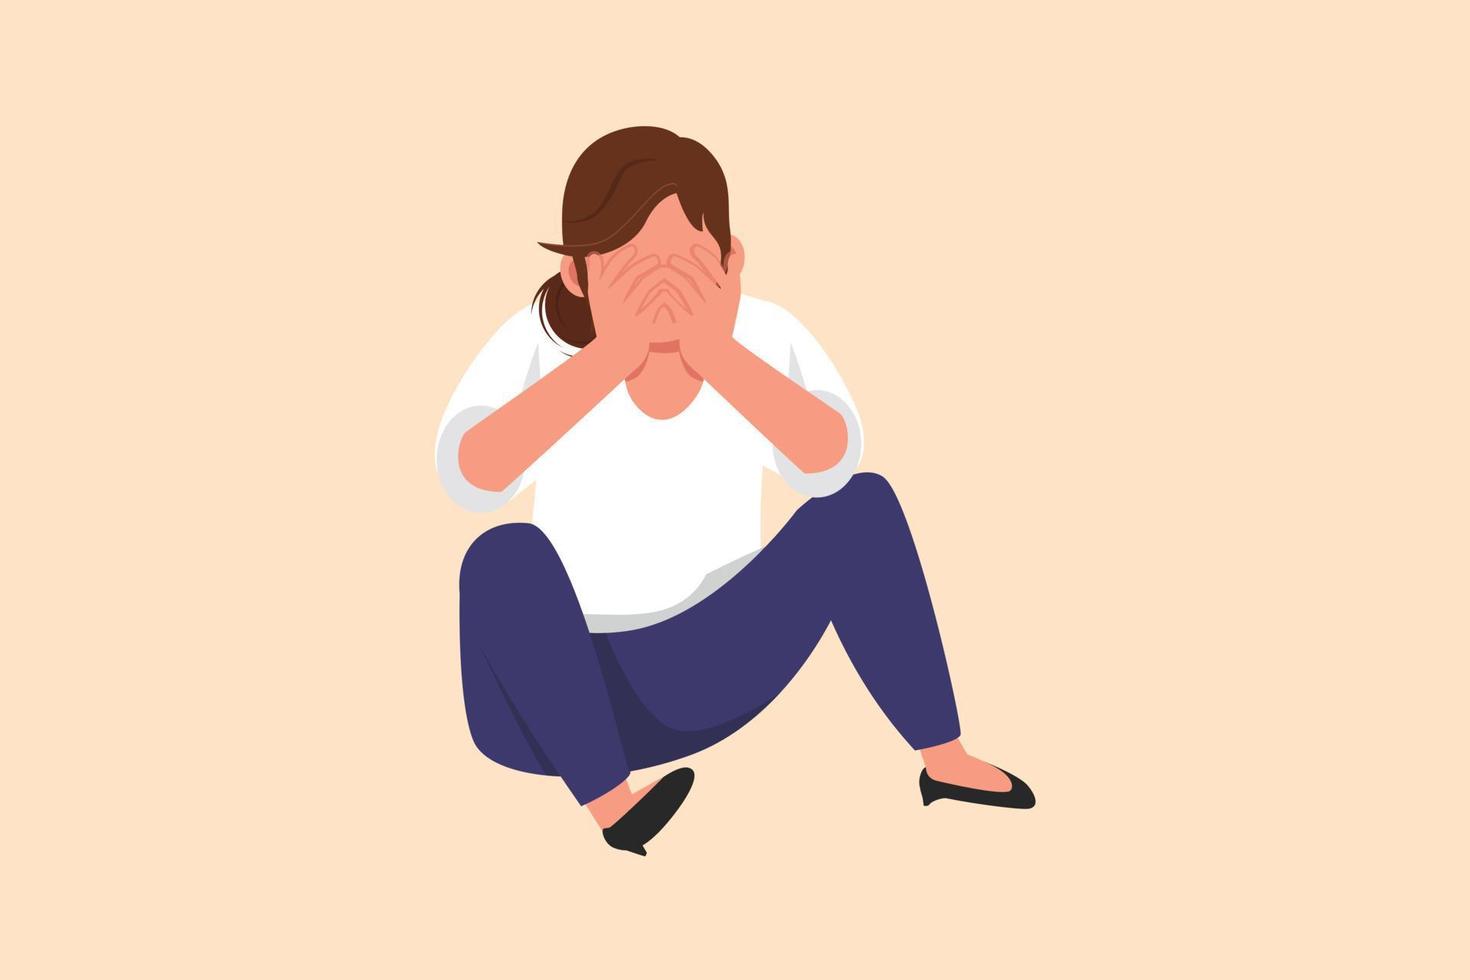 Business design drawing sad depressed businesswoman cover her face by hands and sitting on the floor. Depression disorder, sorrow, sick, disappointment symptom. Flat cartoon style vector illustration